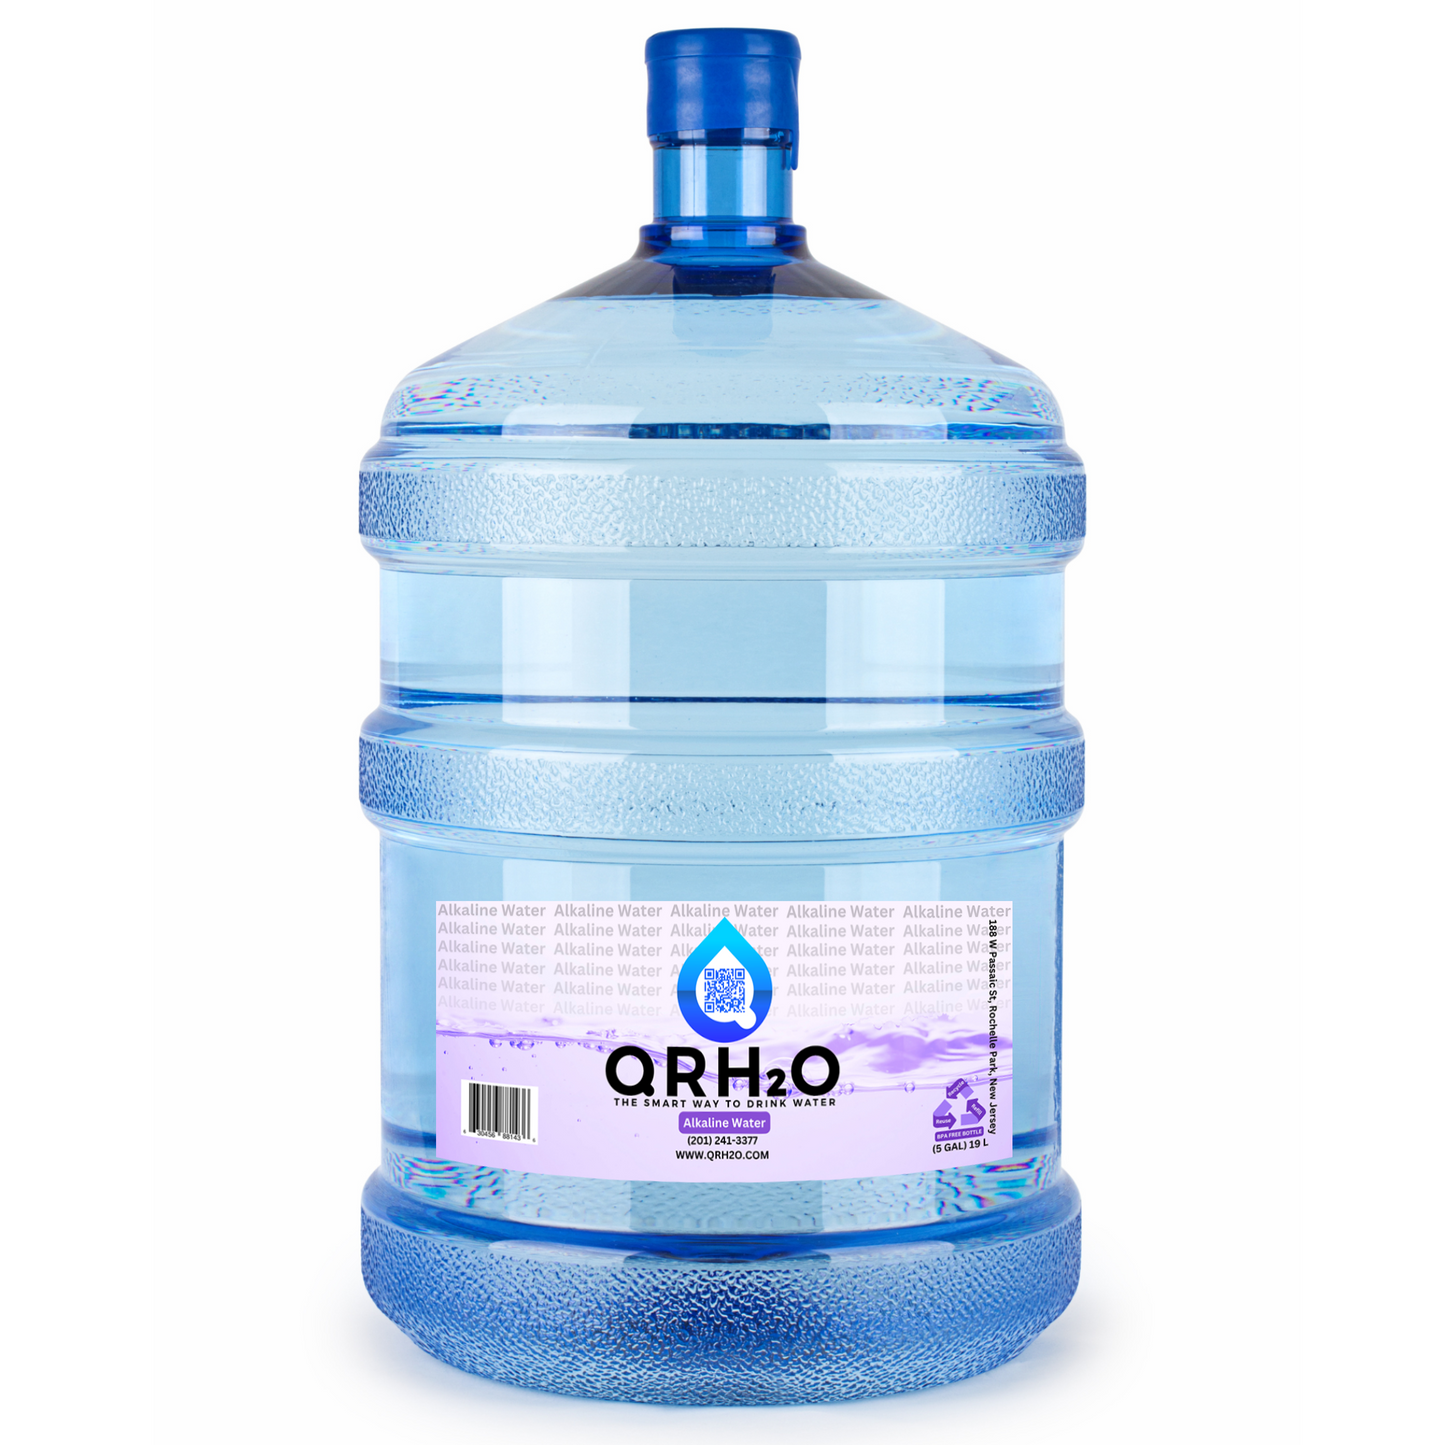 Stay hydrated with our BPA-free 5-gallon alkaline water, sourced from natural minerals and purified to perfection. This 100% alkaline water is packed with essential minerals and has a pH level of 8 or higher, providing a refreshing and hydrating experience. Perfect for use at home or in the office, this large water jug is eco-friendly and sustainable, making it a healthy and responsible choice for you and the environment.